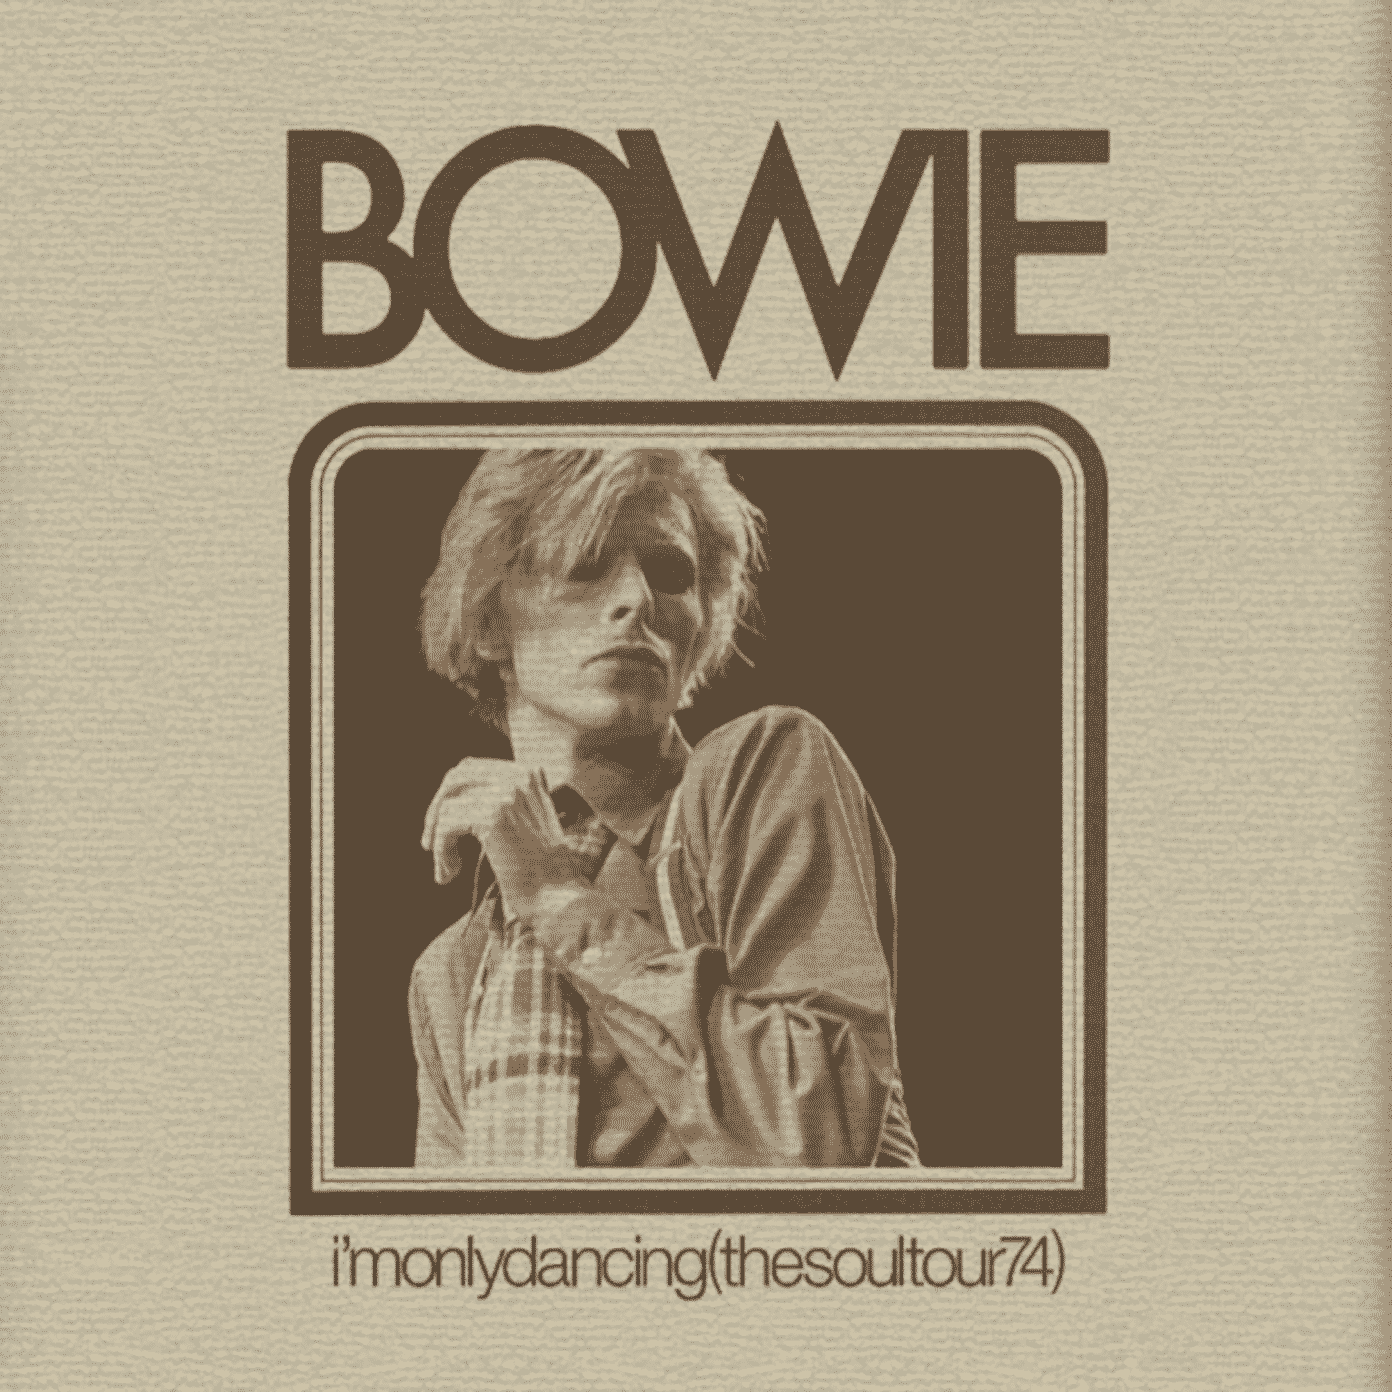 Bowie : I'm Only Dancing (The Soul Tour 74)